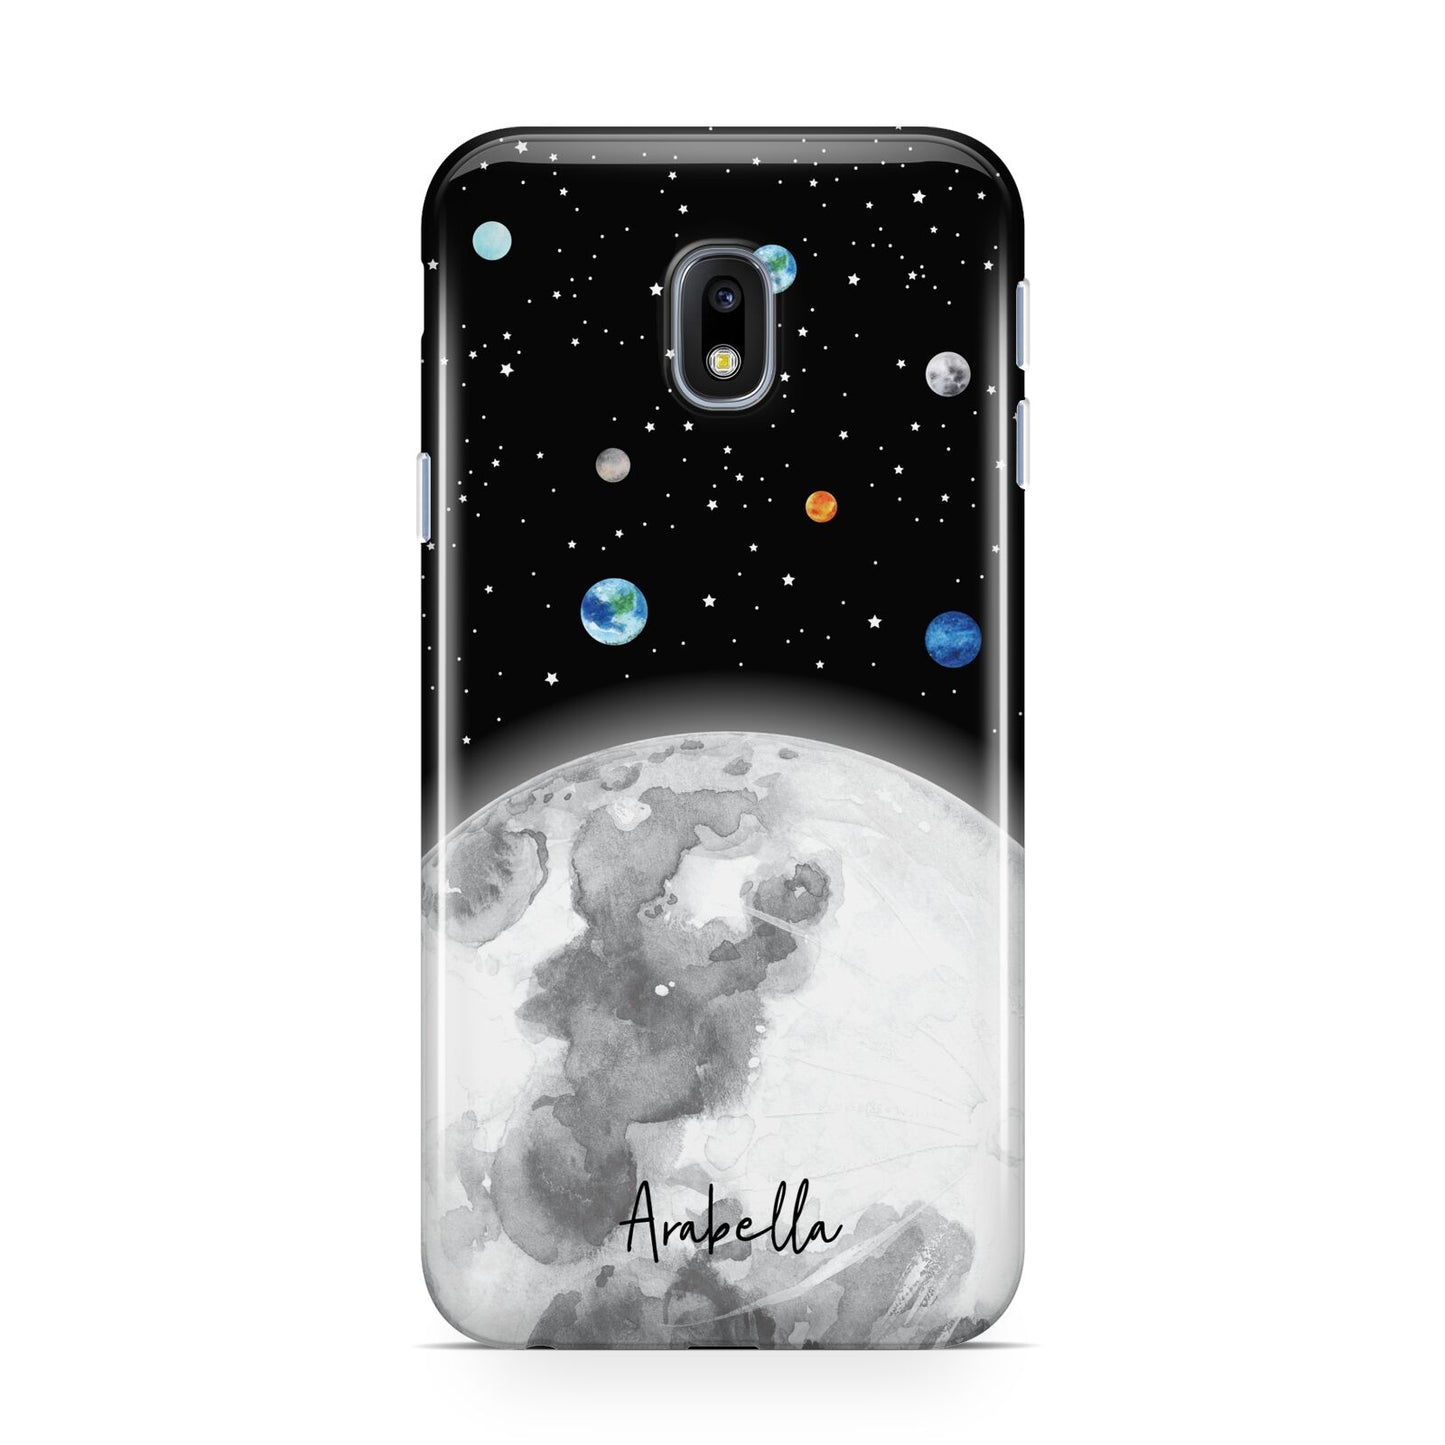 Watercolour Close up Moon with Name Samsung Galaxy J3 2017 Case